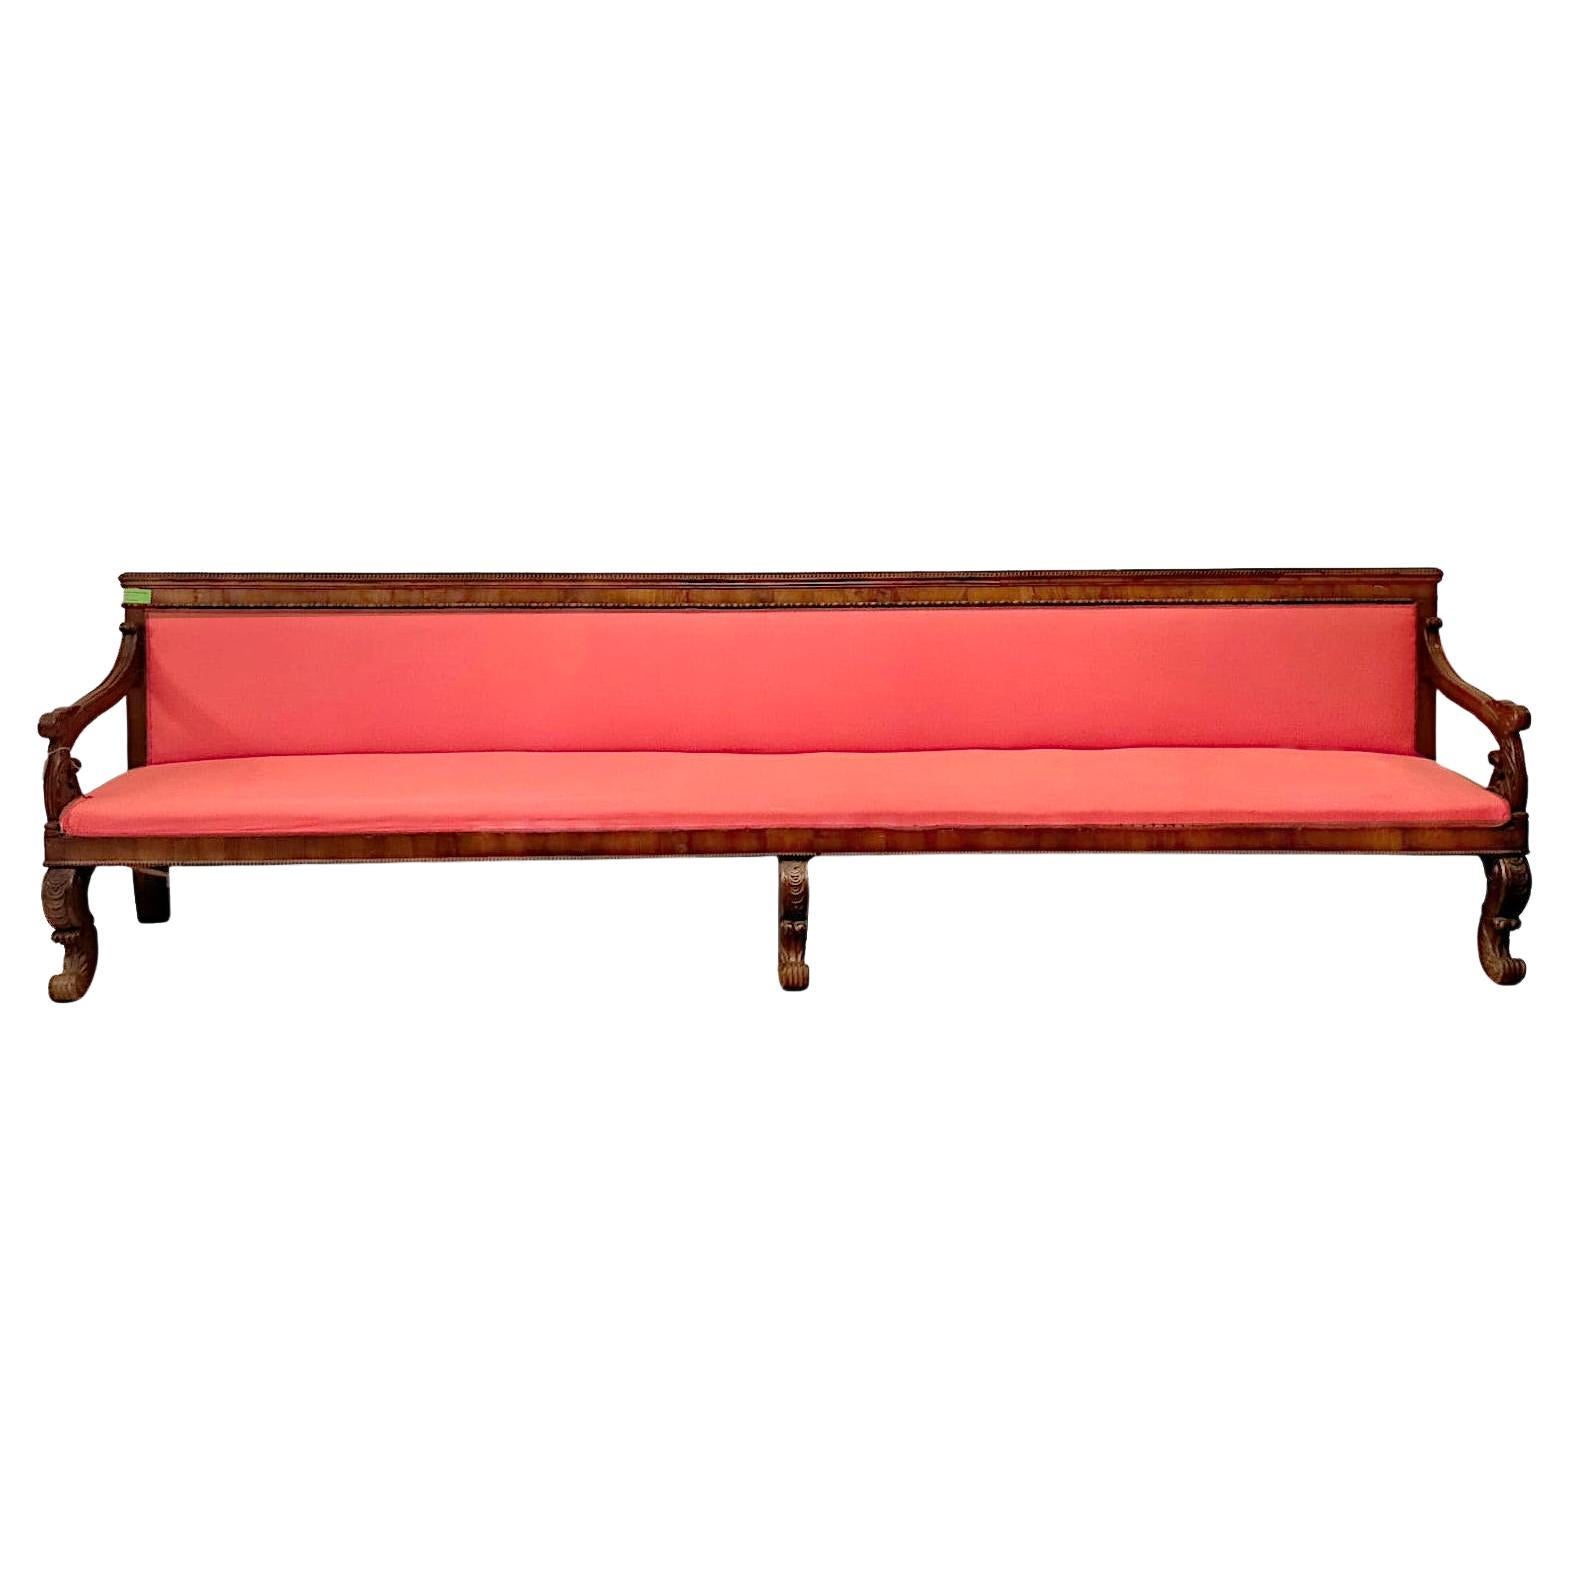 Large Roman Sofa from the 1800s from the Charles X Era